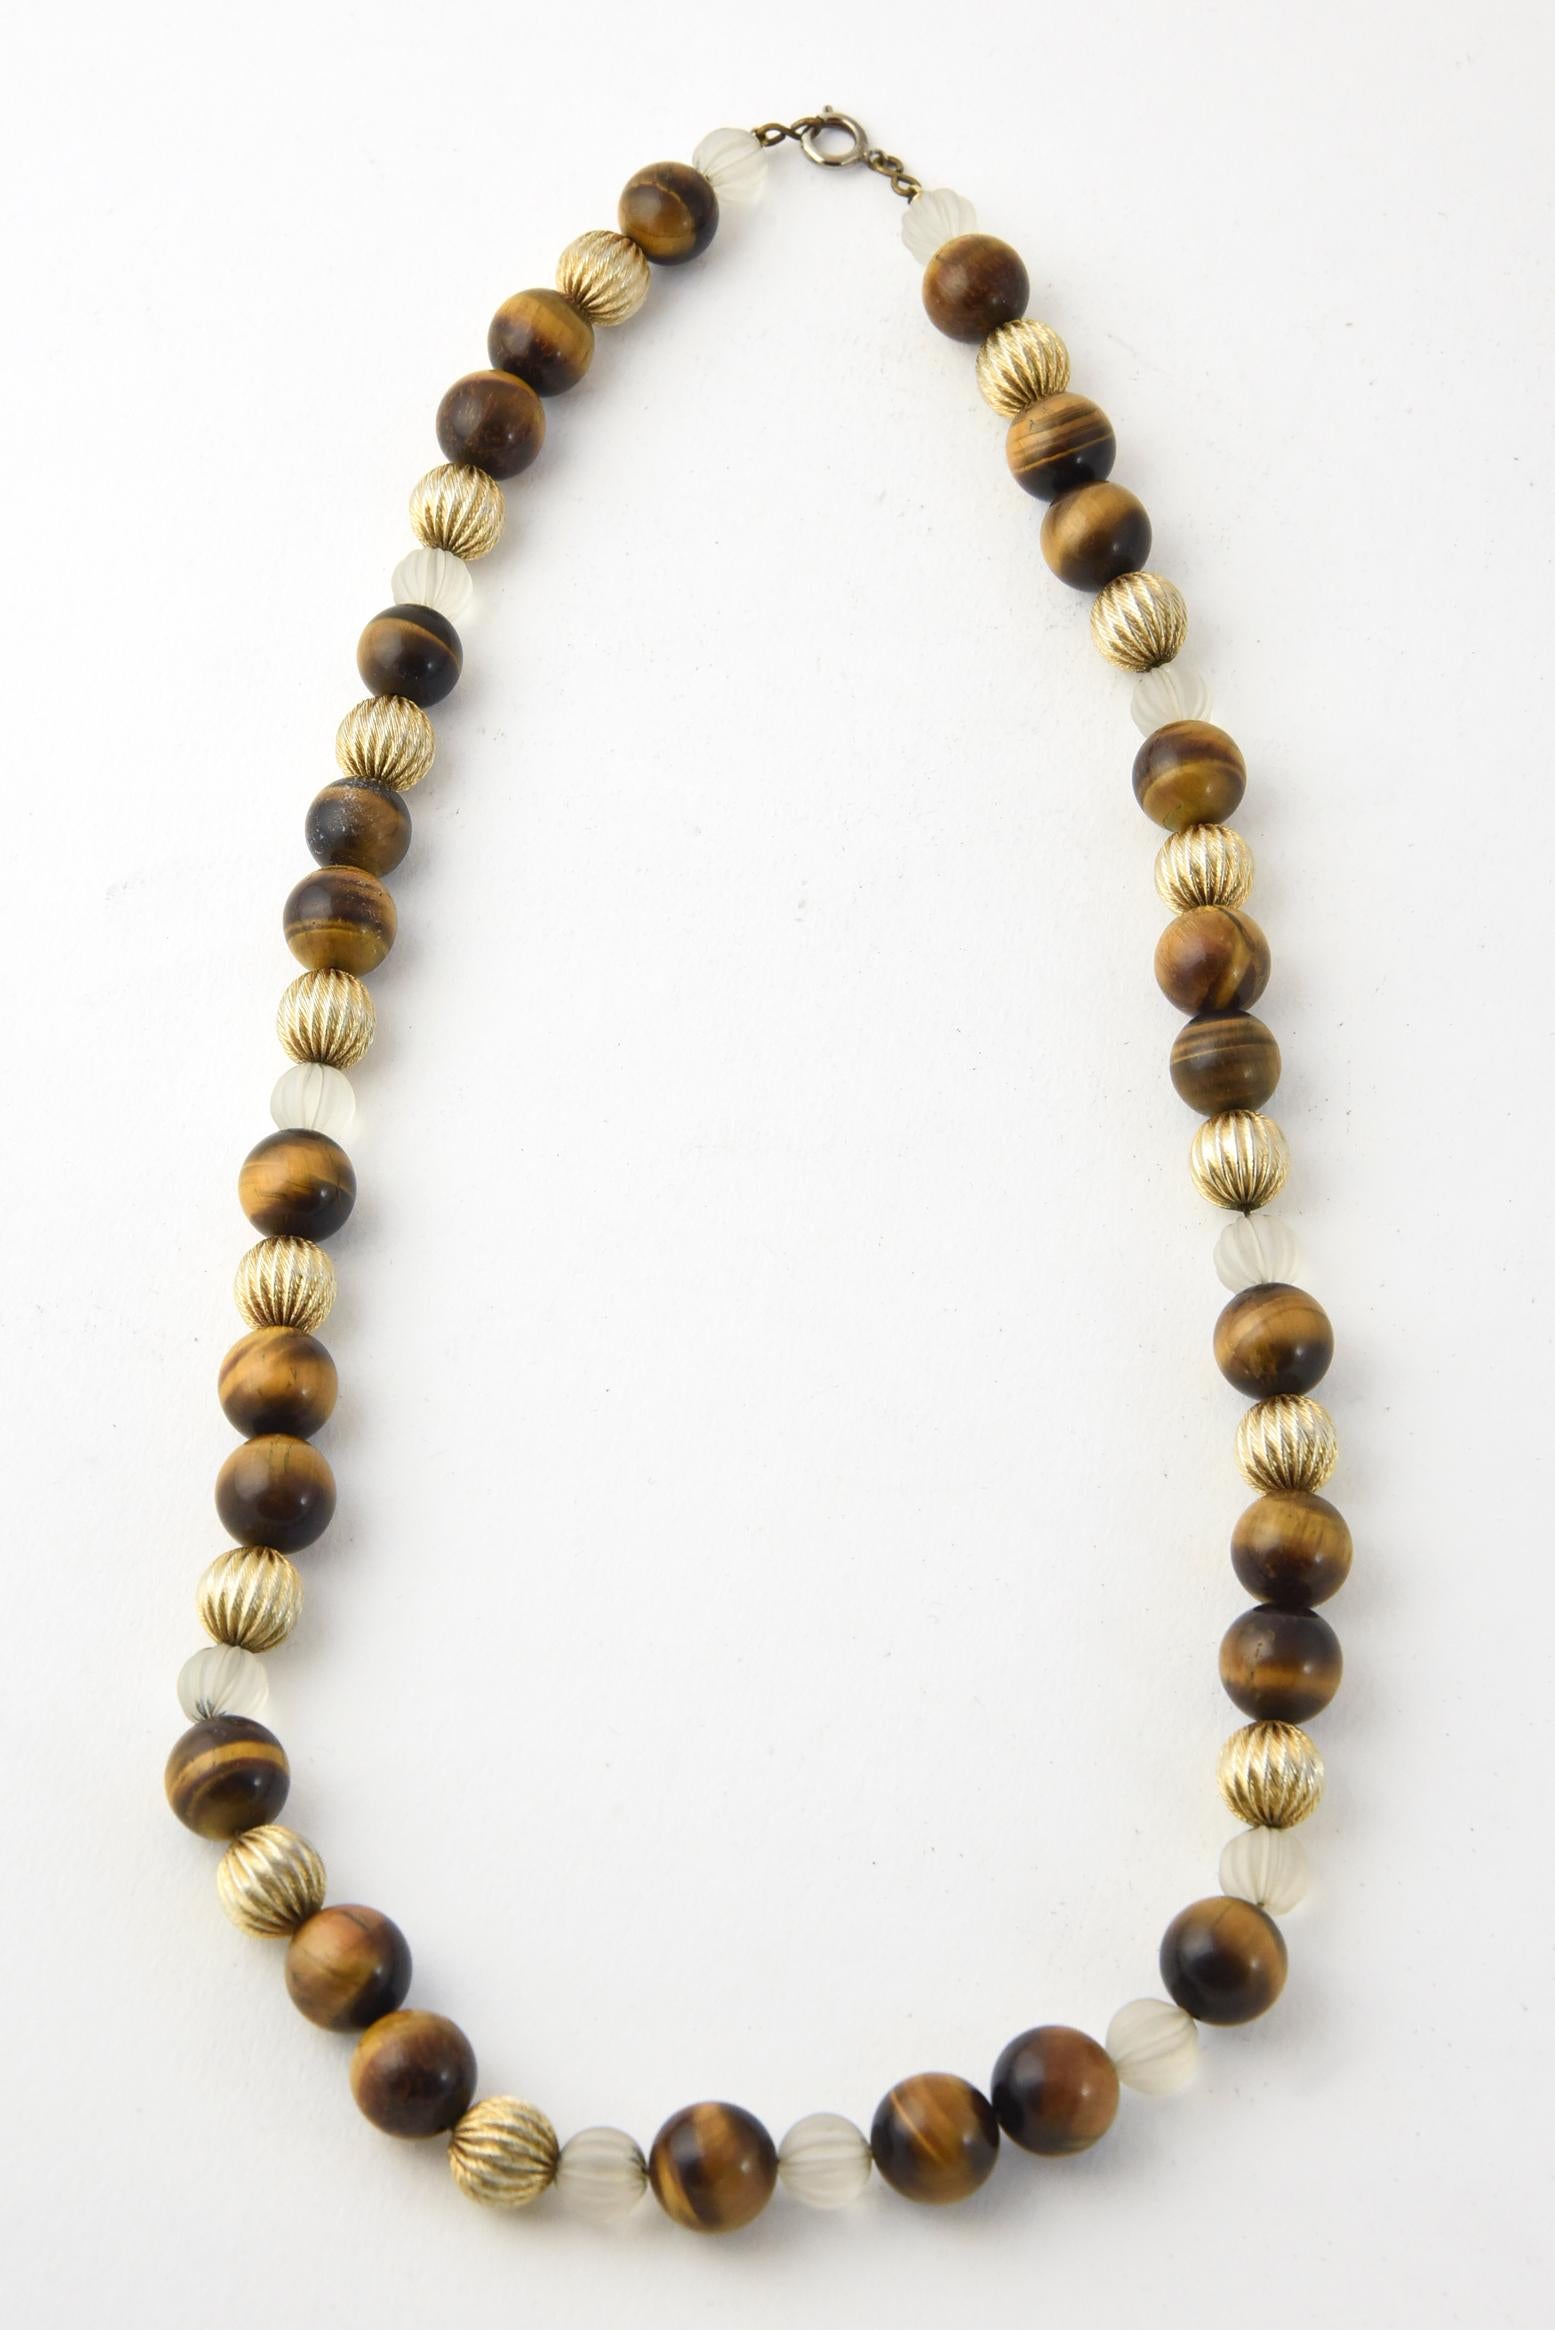 Tiger's eye, carved frosted crystal, and gilt ribbed bead necklace with brass-and-white metal clasp strung on a string. No maker's mark. Age wear.